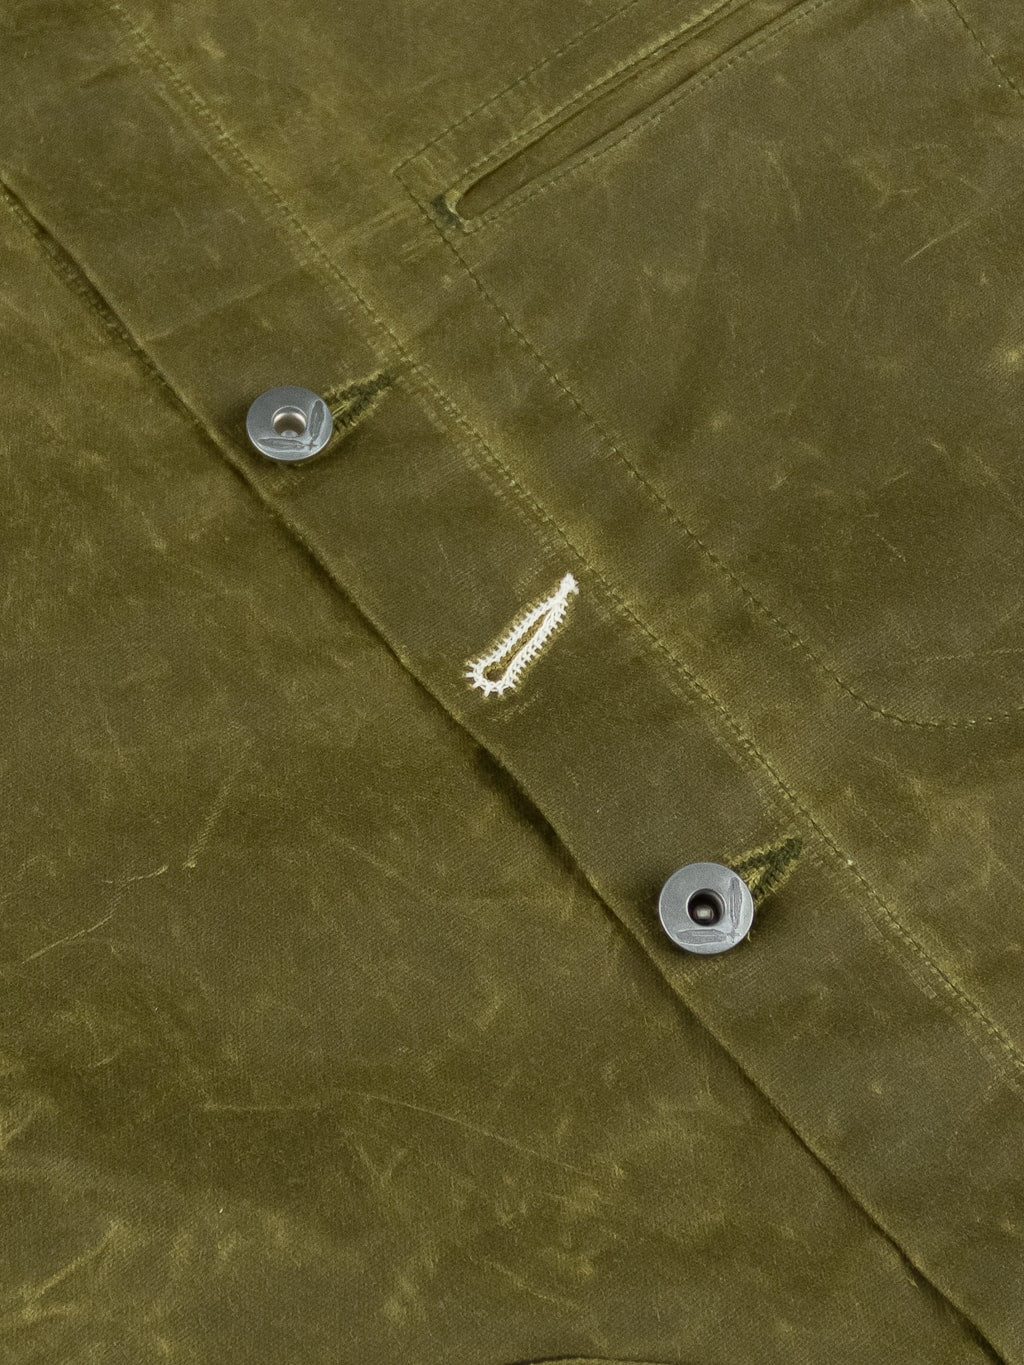 Rogue Territory Supply Jacket Lined Hunter Green Ridgeline branded nickel buttons